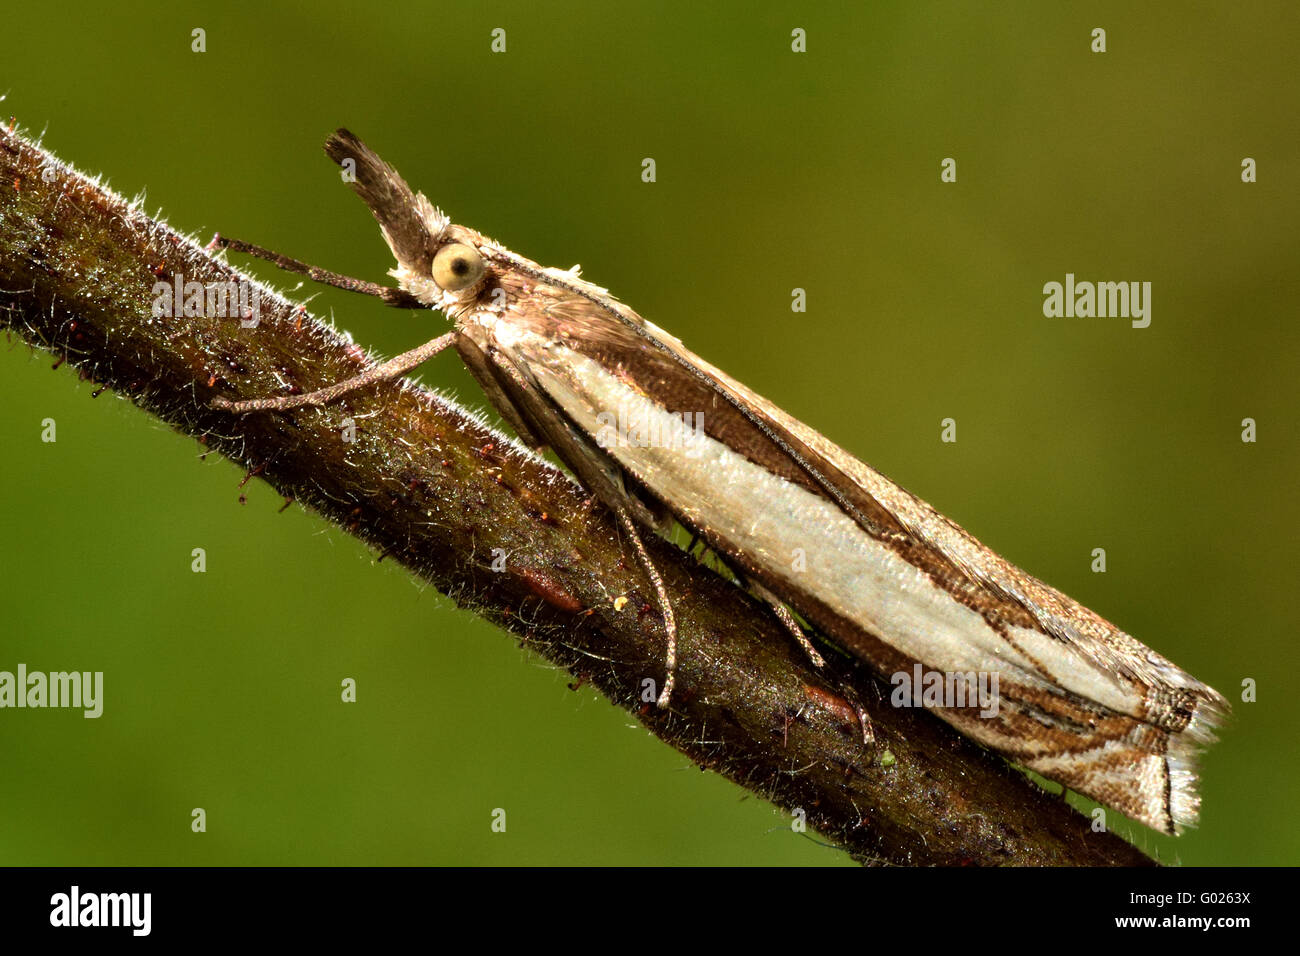 Crambus pascuella micro moth. Small insect in the family Crambidae, known as the grass moths Stock Photo